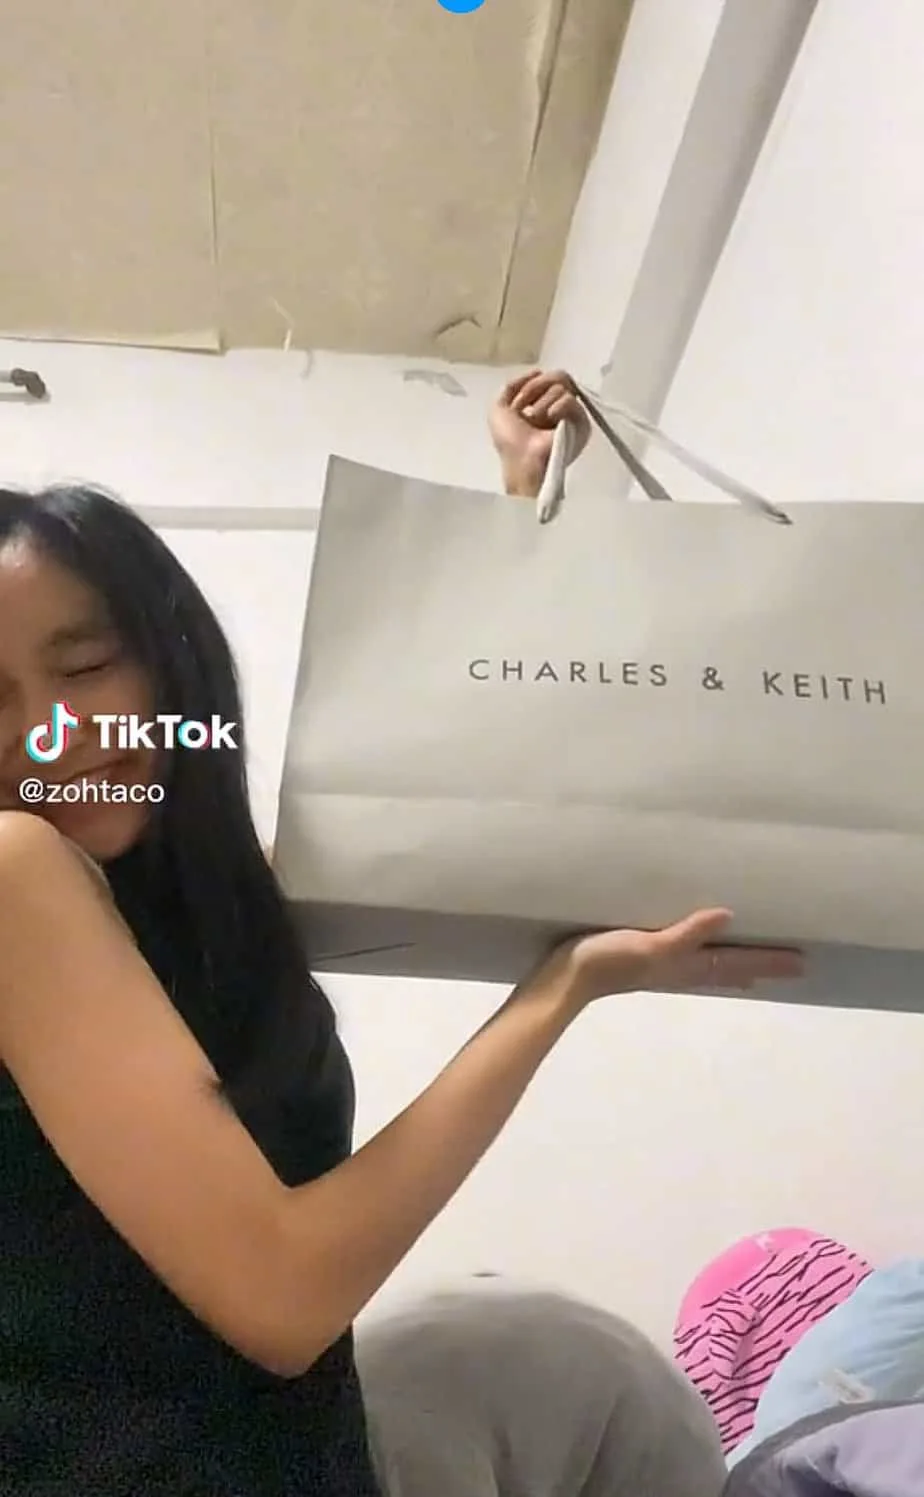 Zoe showing the packaging of her bag from a luxury brand.